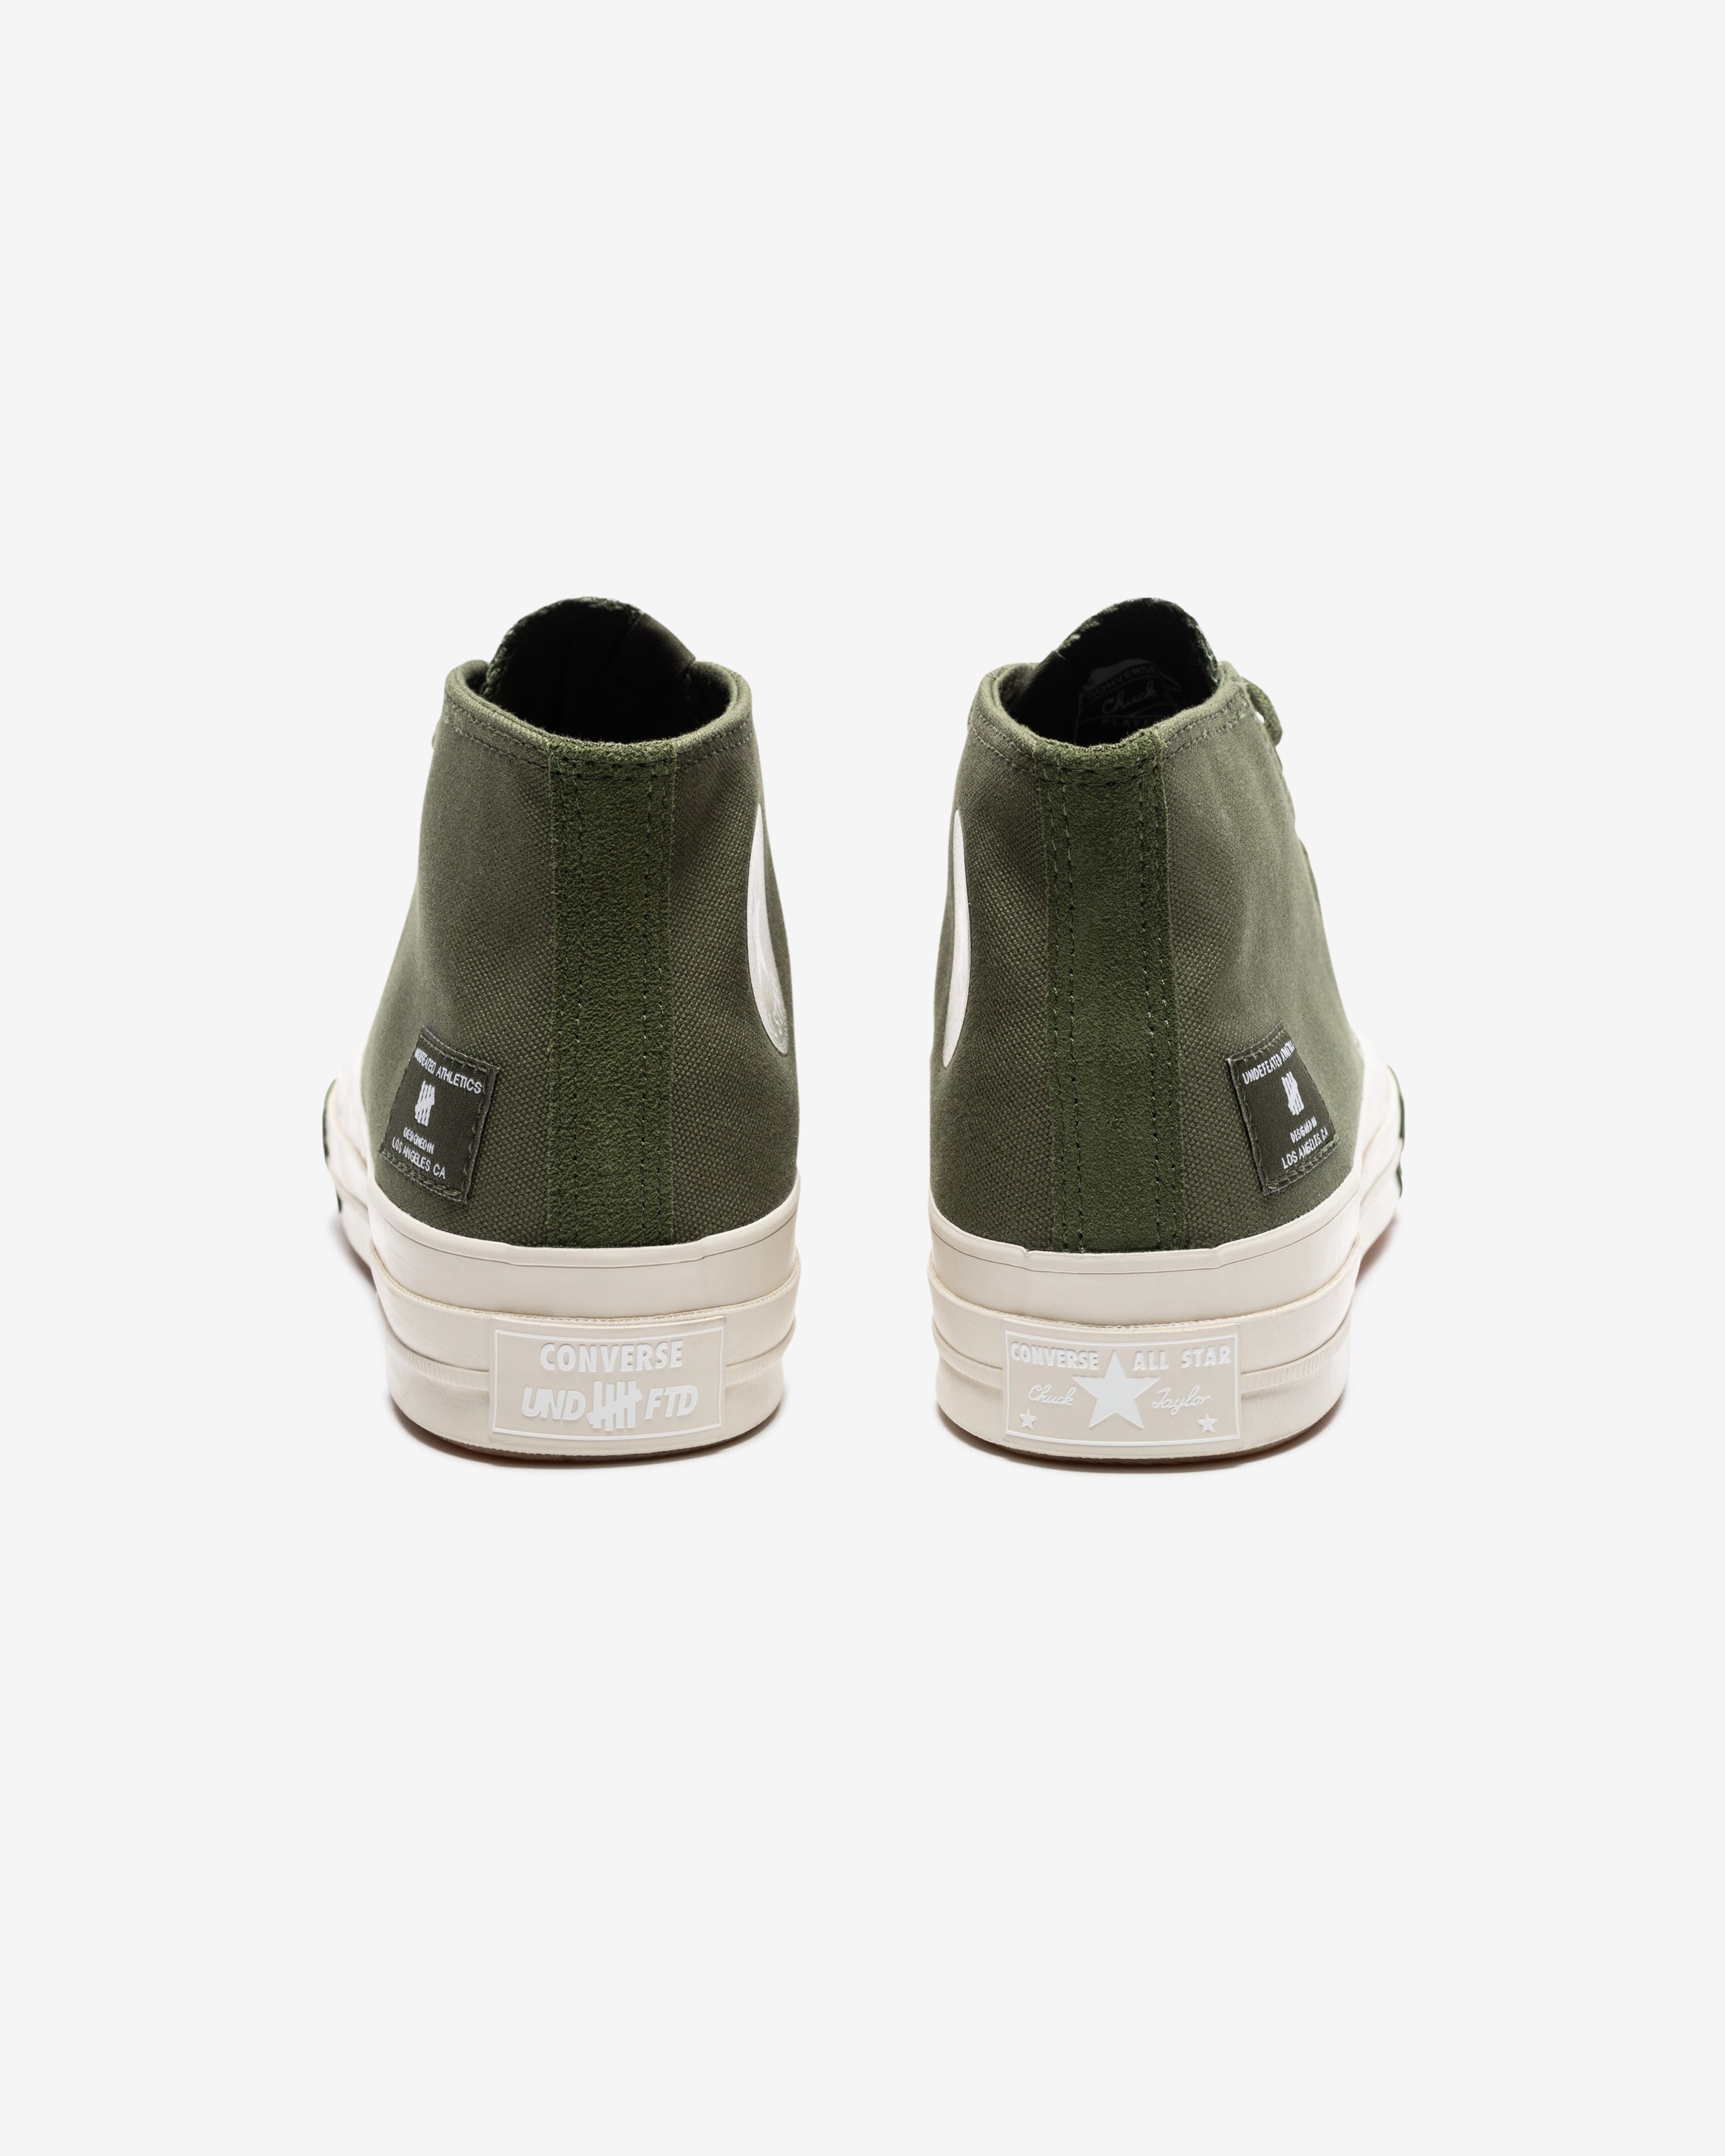 CONVERSE X UNDEFEATED CHUCK 70 MID - CHIVE/ PARCHMENT